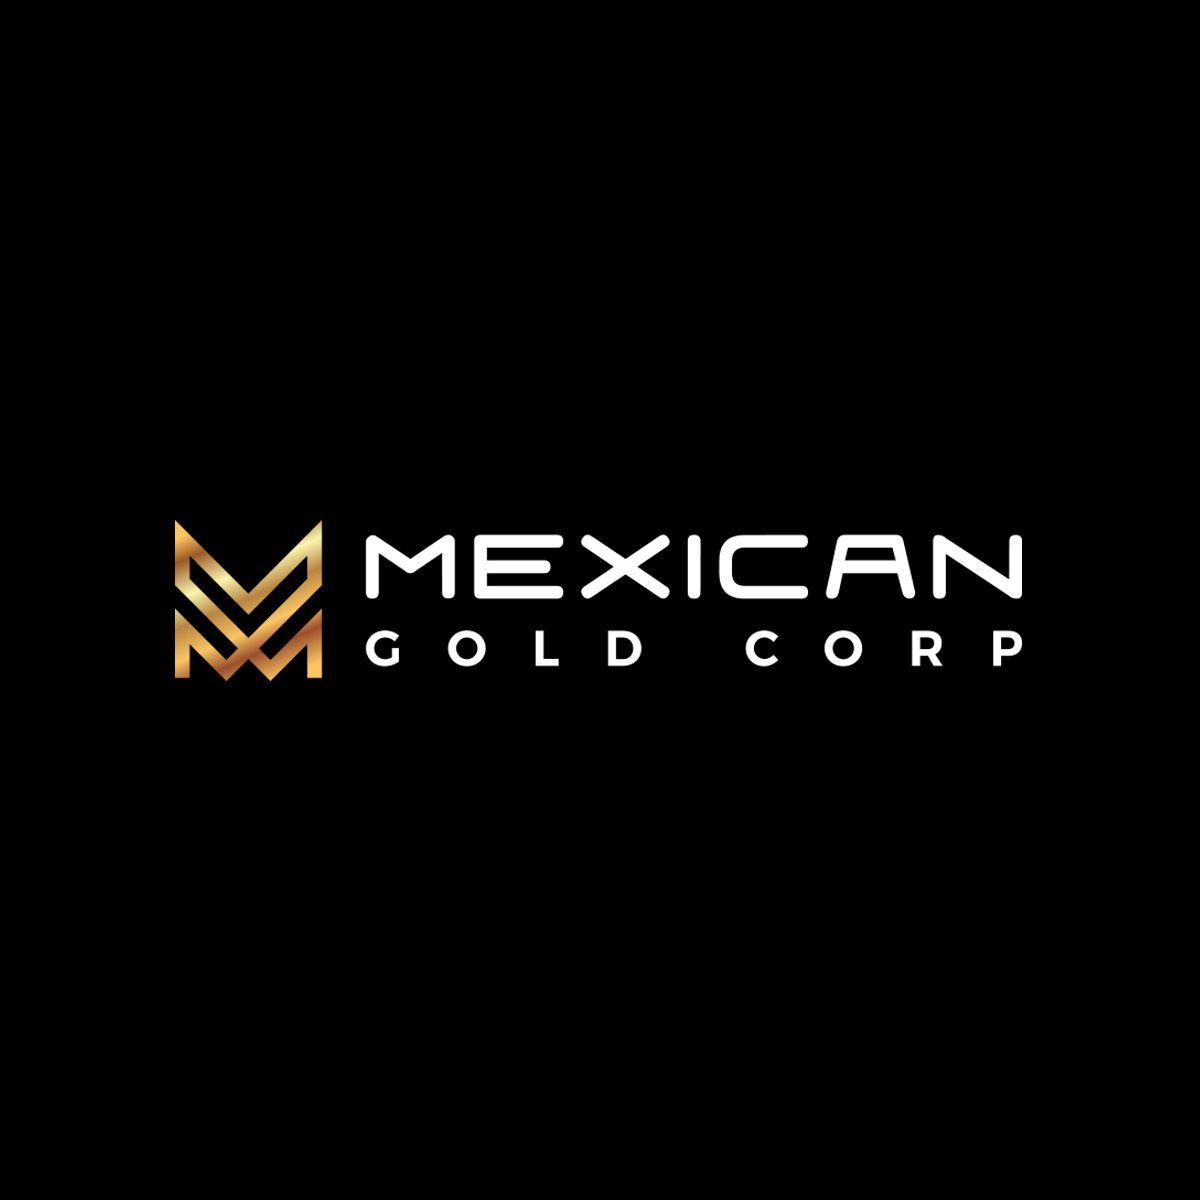 Goldcorp Logo - Mexican Gold Corp